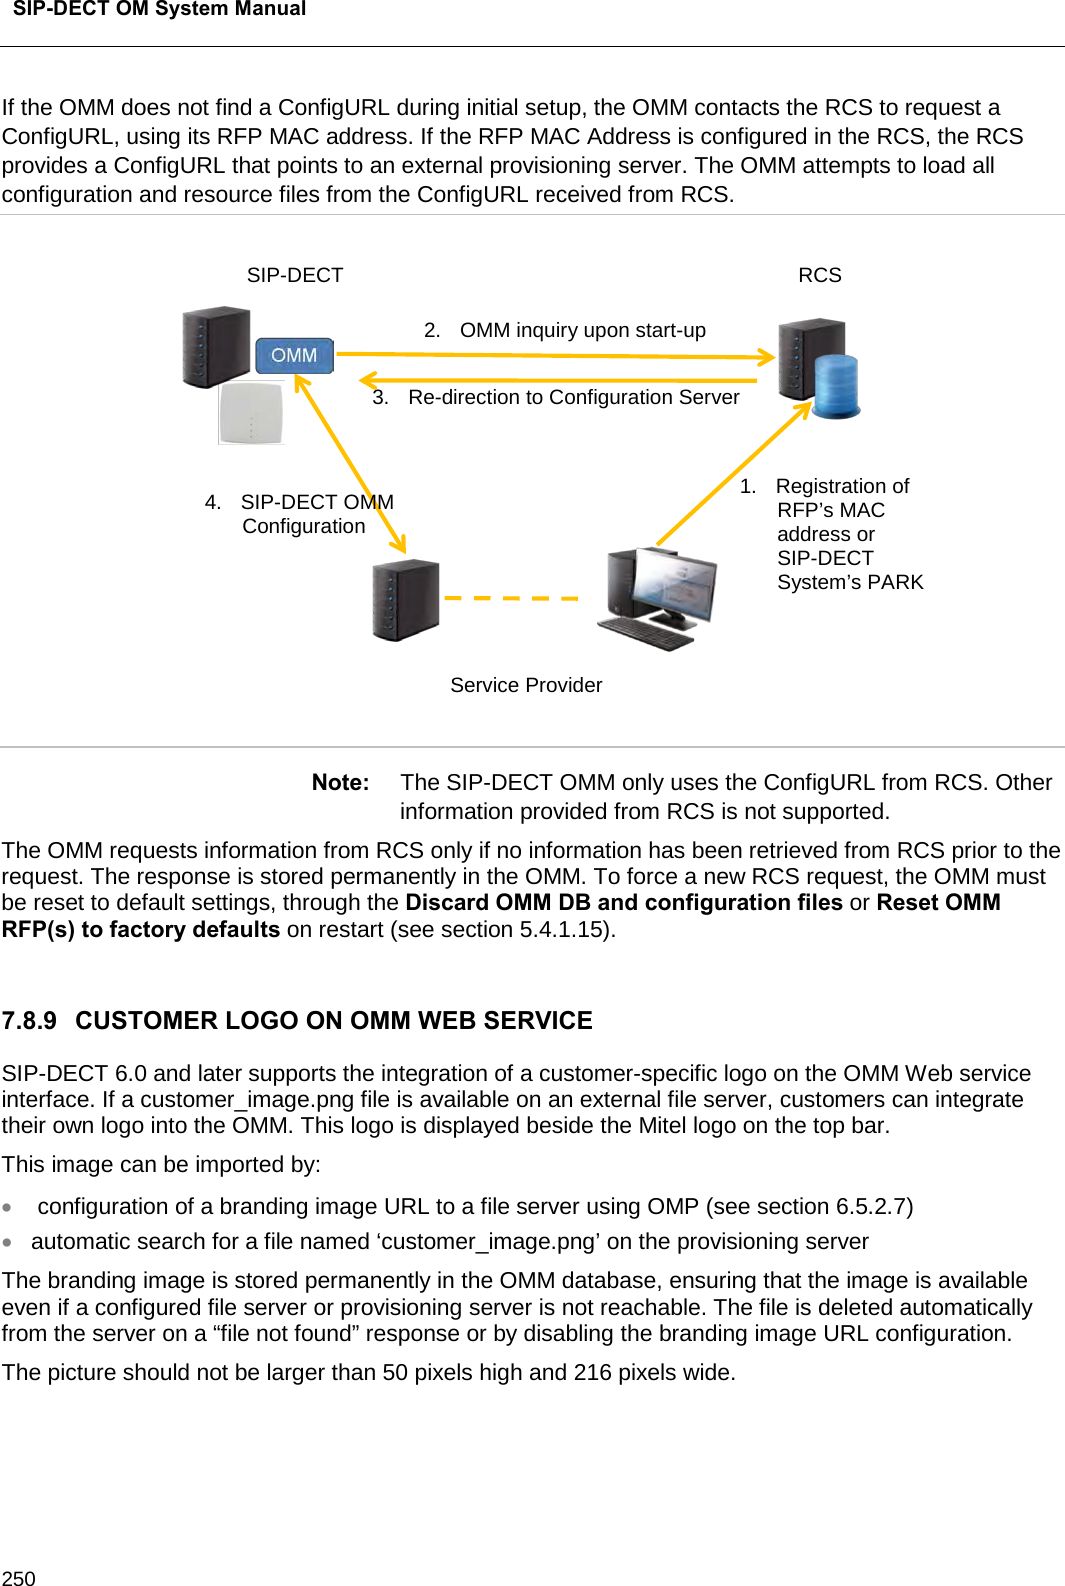  SIP-DECT OM System Manual    250 If the OMM does not find a ConfigURL during initial setup, the OMM contacts the RCS to request a ConfigURL, using its RFP MAC address. If the RFP MAC Address is configured in the RCS, the RCS provides a ConfigURL that points to an external provisioning server. The OMM attempts to load all configuration and resource files from the ConfigURL received from RCS.  Note: The SIP-DECT OMM only uses the ConfigURL from RCS. Other information provided from RCS is not supported.  The OMM requests information from RCS only if no information has been retrieved from RCS prior to the request. The response is stored permanently in the OMM. To force a new RCS request, the OMM must be reset to default settings, through the Discard OMM DB and configuration files or Reset OMM RFP(s) to factory defaults on restart (see section 5.4.1.15).  7.8.9 CUSTOMER LOGO ON OMM WEB SERVICE  SIP-DECT 6.0 and later supports the integration of a customer-specific logo on the OMM Web service interface. If a customer_image.png file is available on an external file server, customers can integrate their own logo into the OMM. This logo is displayed beside the Mitel logo on the top bar. This image can be imported by: •  configuration of a branding image URL to a file server using OMP (see section 6.5.2.7) • automatic search for a file named ‘customer_image.png’ on the provisioning server The branding image is stored permanently in the OMM database, ensuring that the image is available even if a configured file server or provisioning server is not reachable. The file is deleted automatically from the server on a “file not found” response or by disabling the branding image URL configuration. The picture should not be larger than 50 pixels high and 216 pixels wide.  Service Provider SIP-DECT RCS 1. Registration of RFP’s MAC address or SIP-DECT System’s PARK 2. OMM inquiry upon start-up 3. Re-direction to Configuration Server 4. SIP-DECT OMM Configuration 